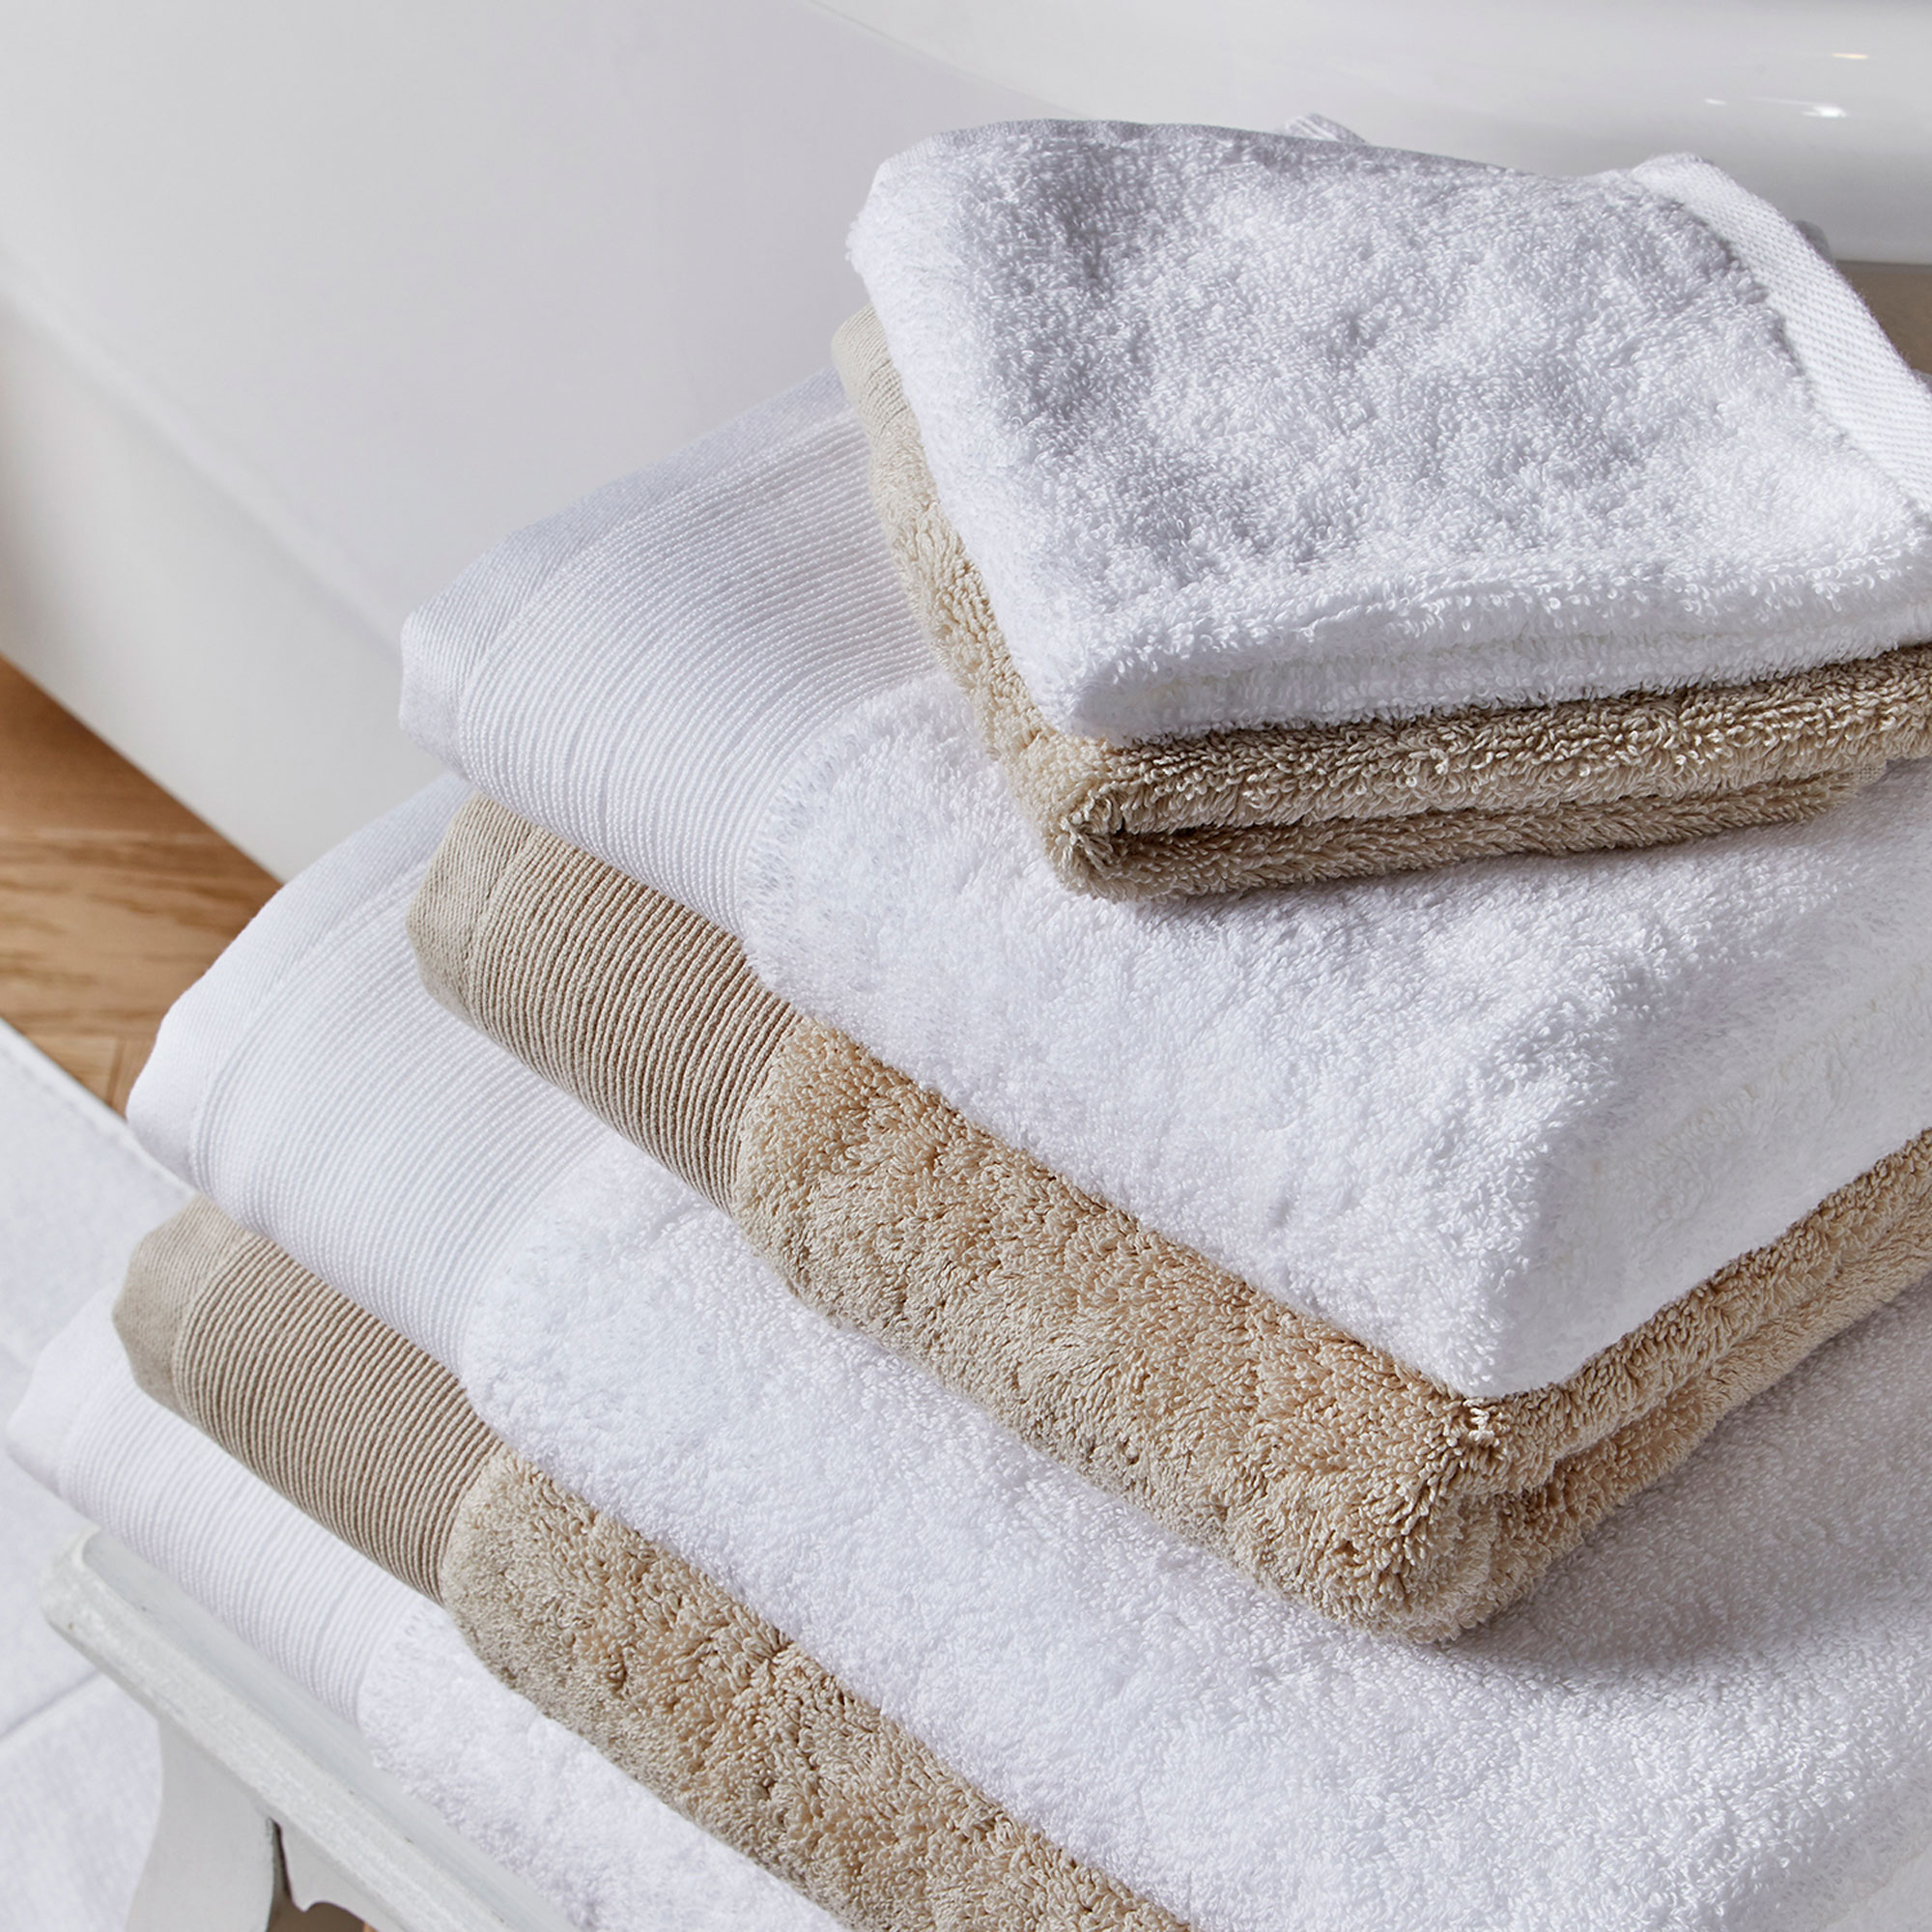 How often to wash towels, according to experts | Ideal Home